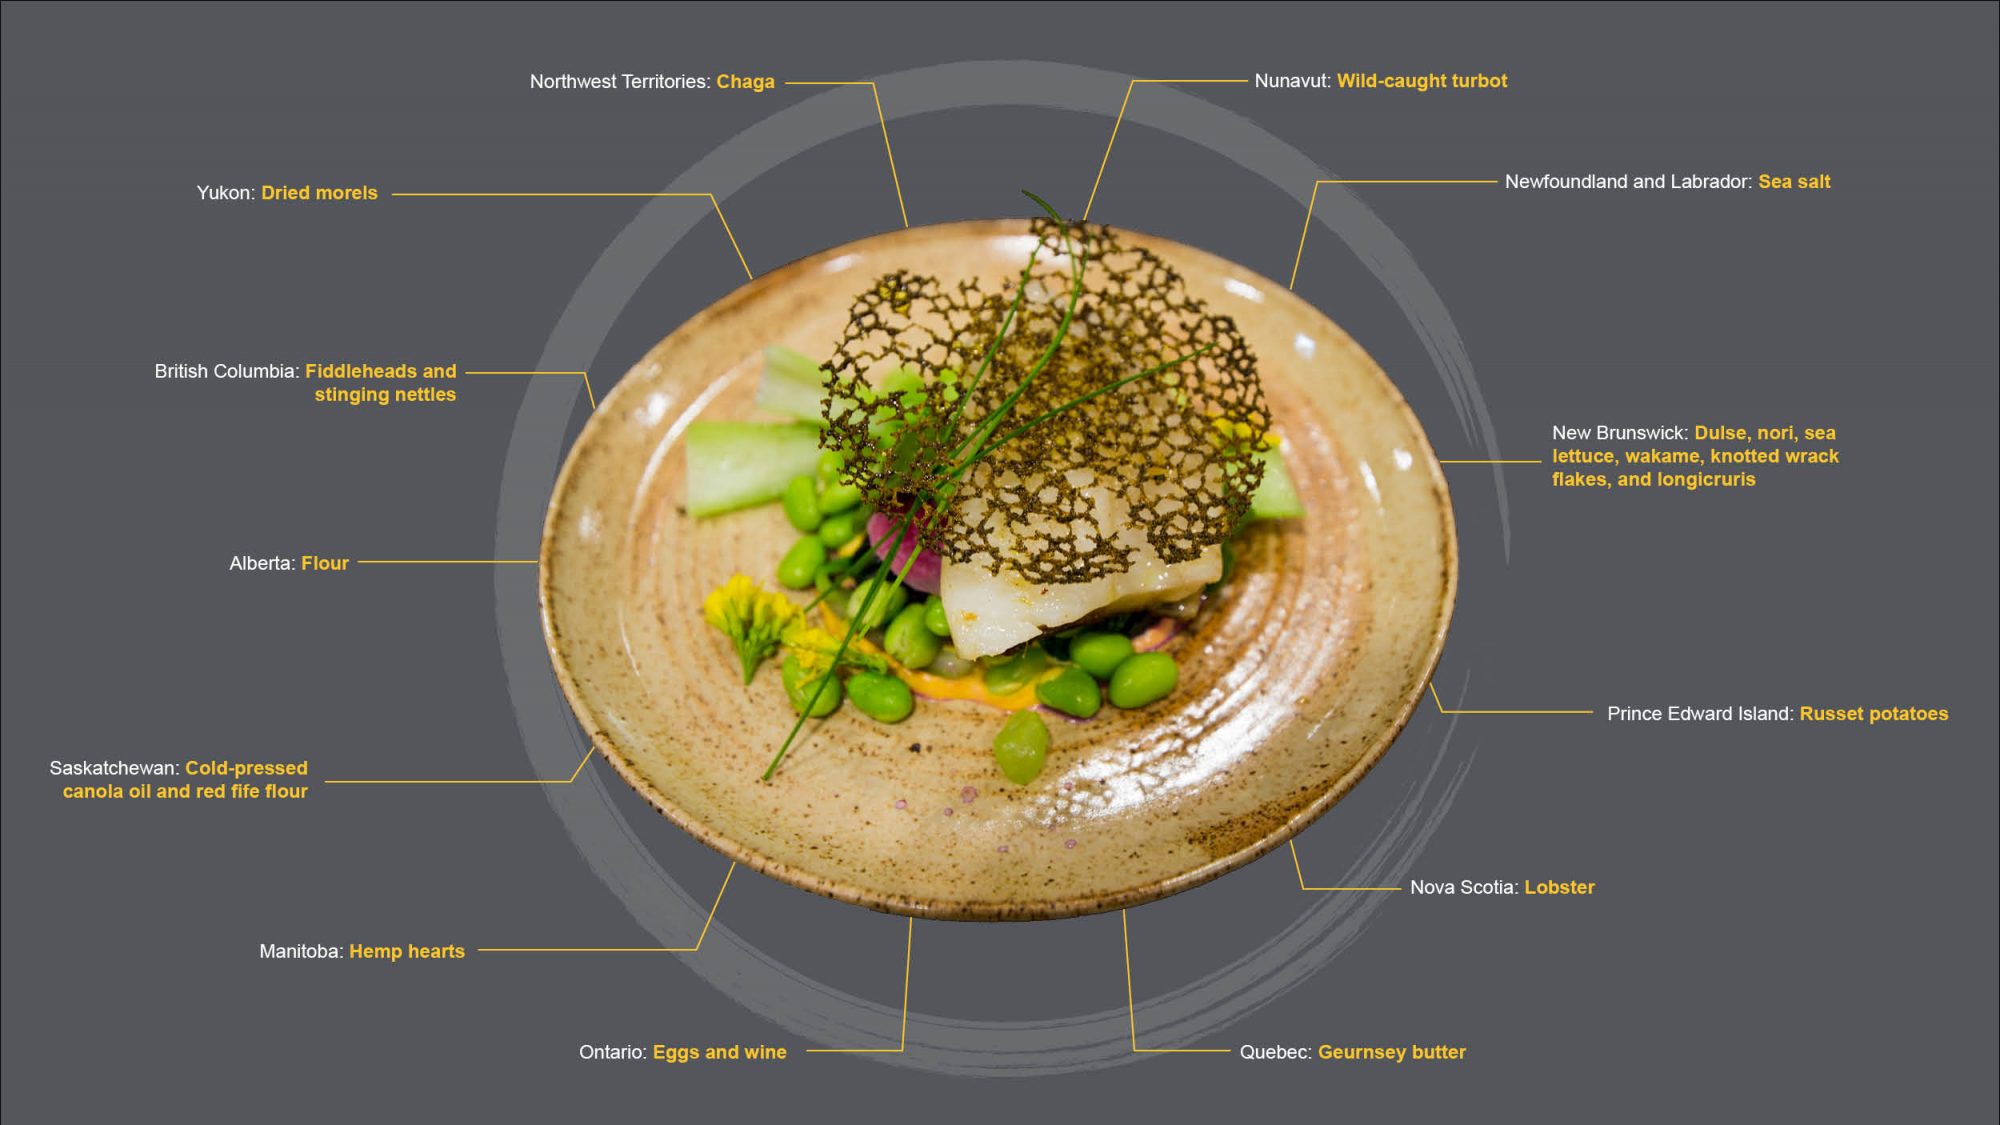 A diagram including an image Chef Laura's plate, with text references to each ingredient and where they are from. Ingredient lists at the bottom of the webpage.